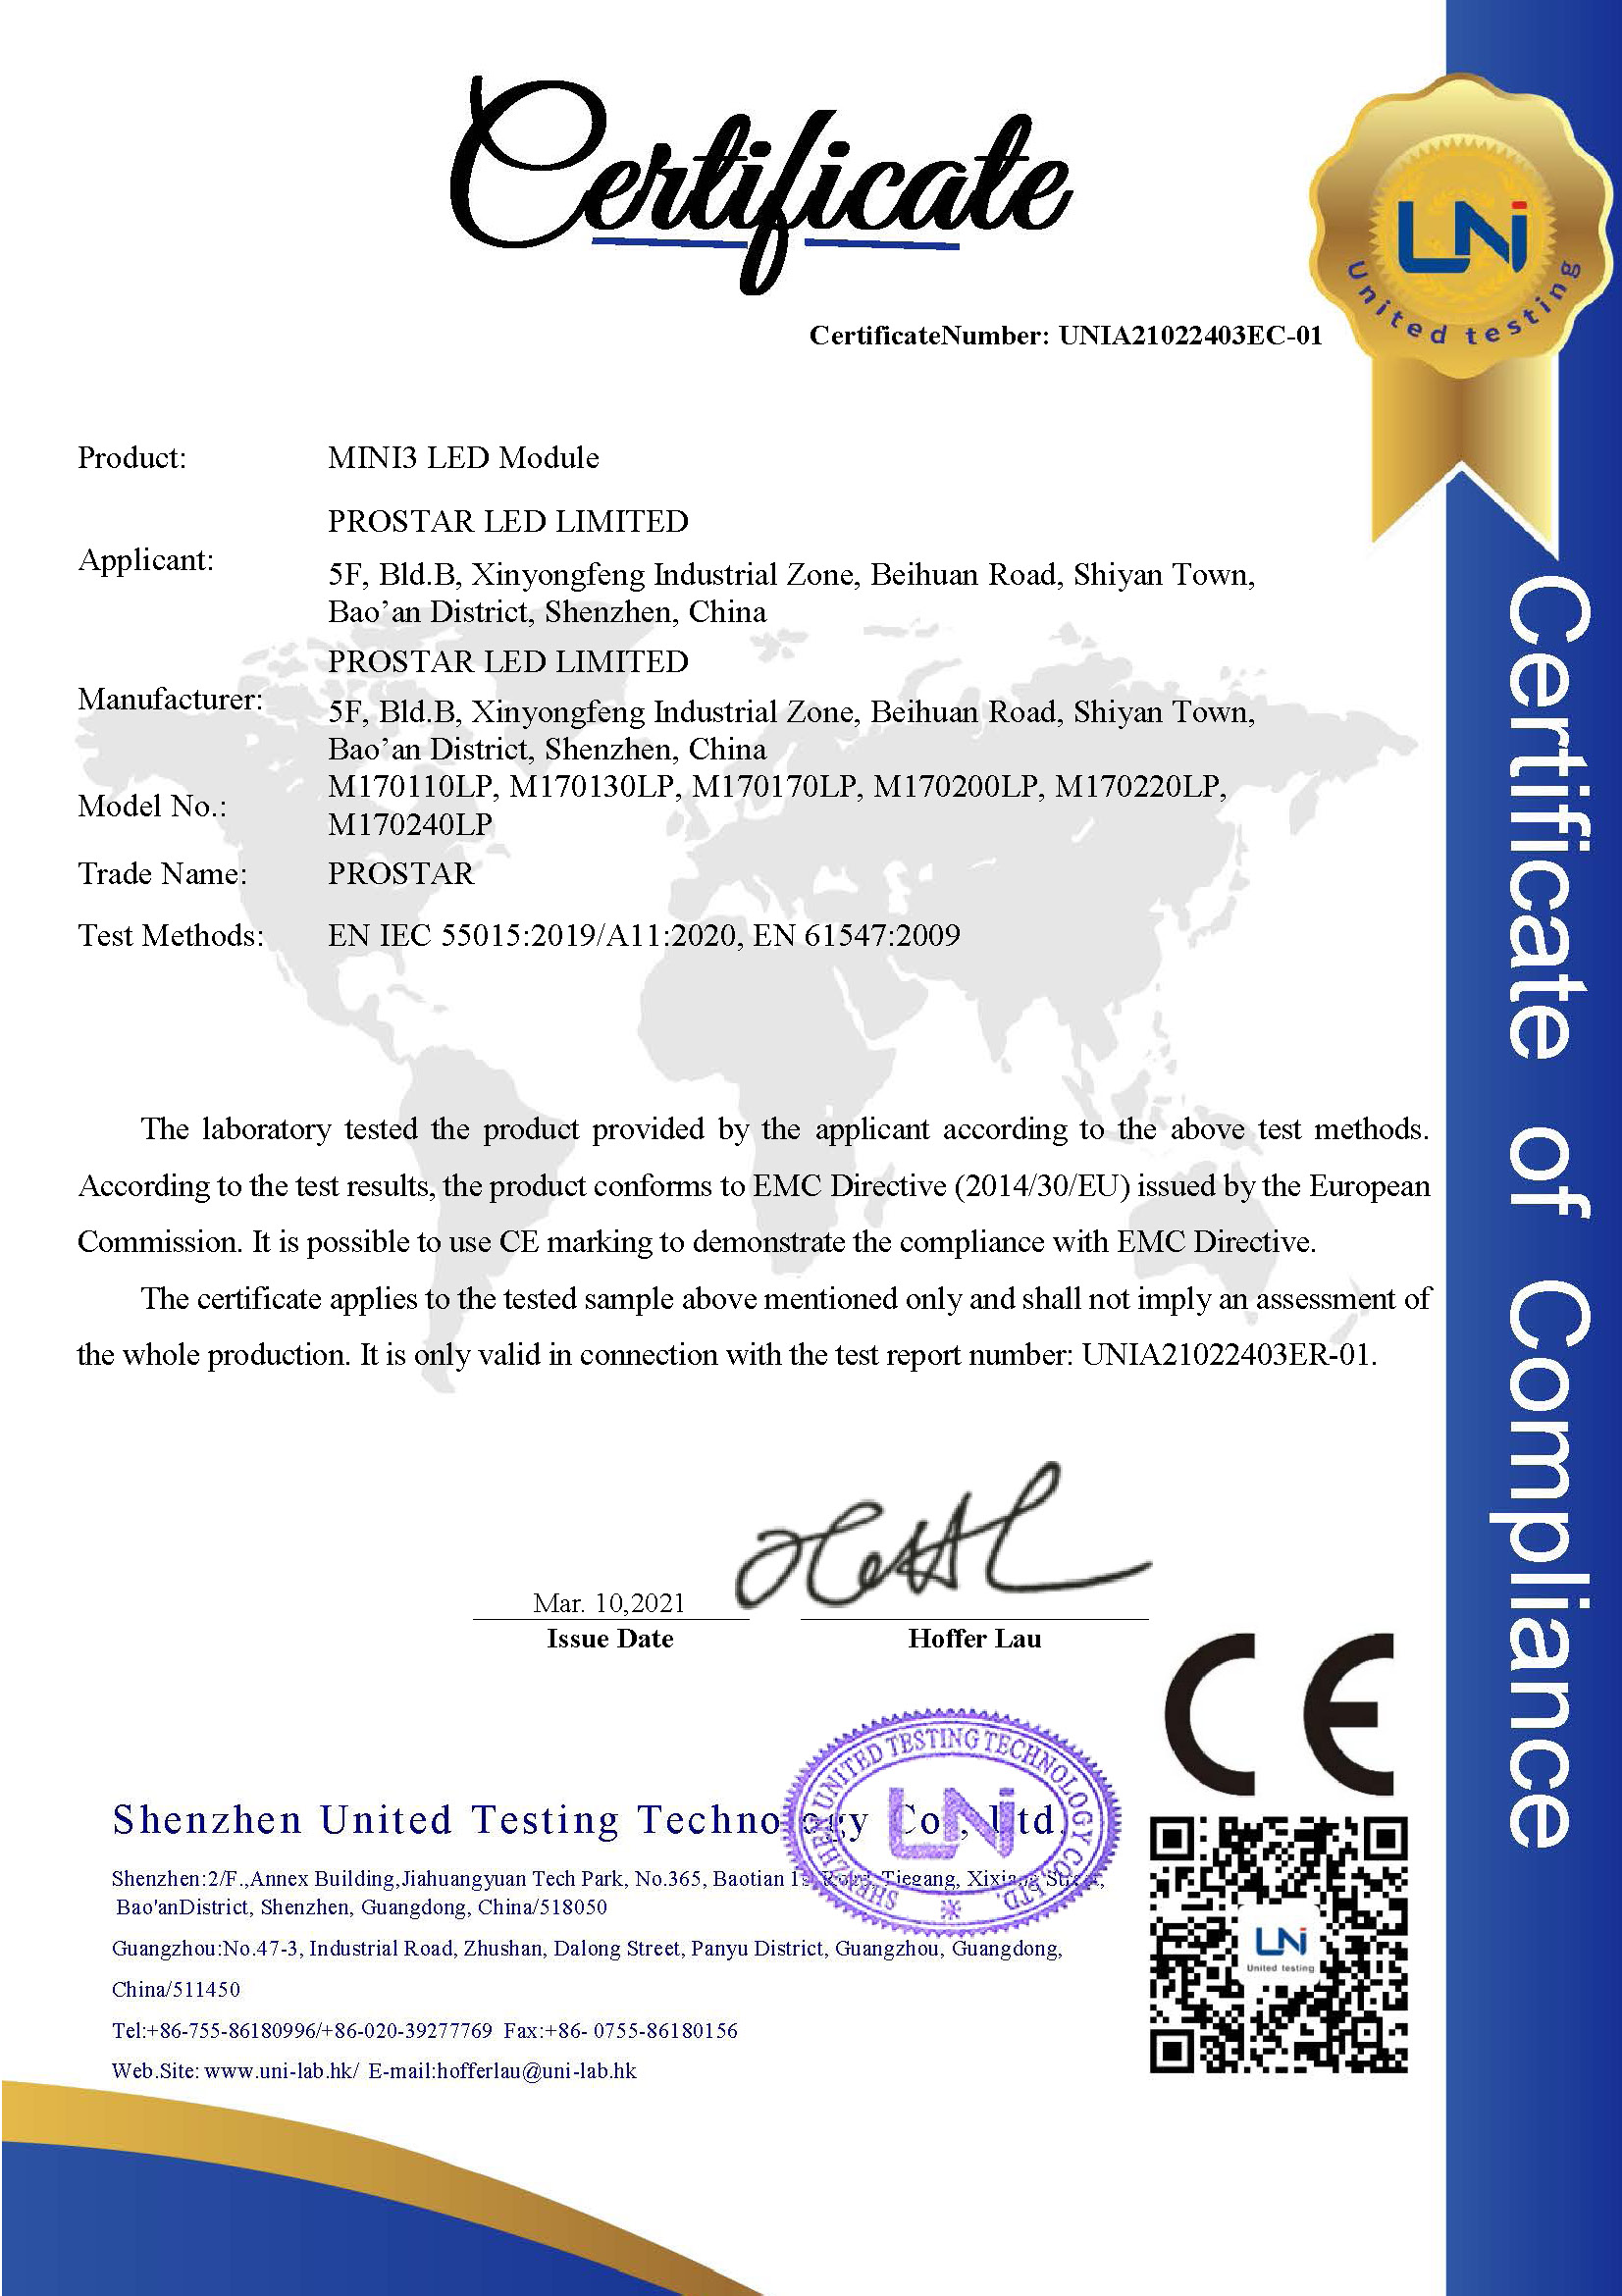 LED Module EMC Certificate and Test Report Completed